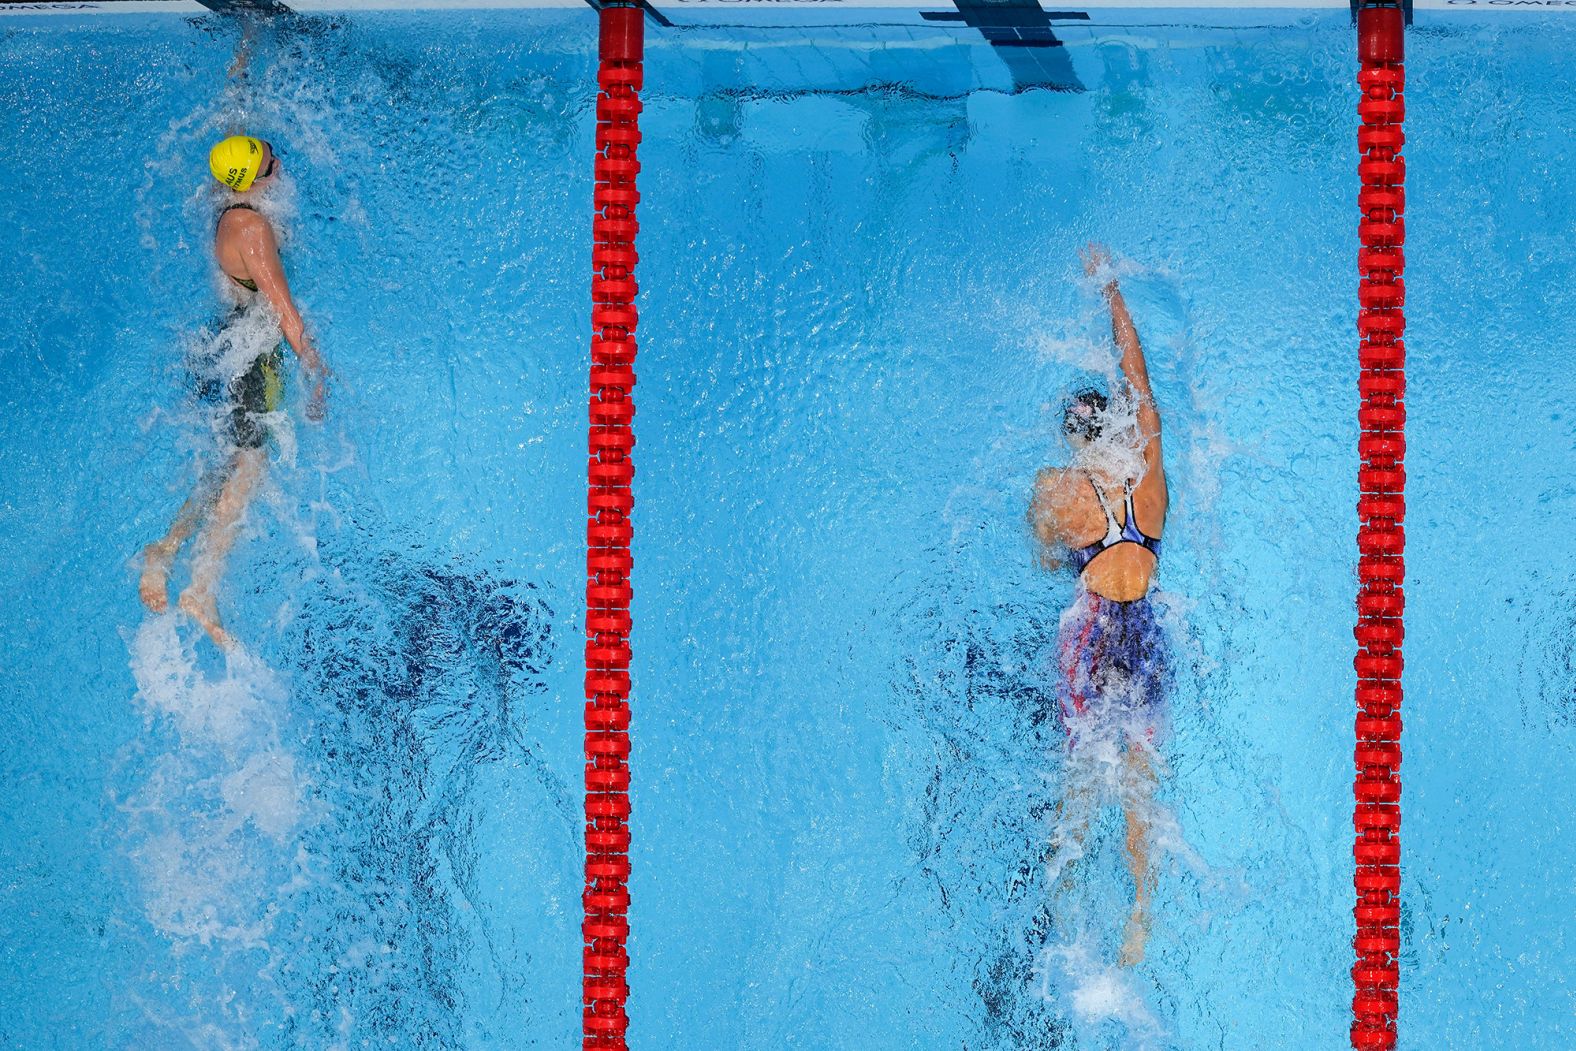 Australian swimmer Ariarne Titmus edges the United States' Katie Ledecky <a href="https://www.cnn.com/world/live-news/tokyo-2020-olympics-07-25-21-spt/h_0a7792e857fef154a53104963ec8a53d" target="_blank">to win the 400-meter freestyle</a> on July 26. It's the first Olympic medal for Titmus, the defending world champion in the event. Ledecky won the event at the 2016 Olympics, where she set a world record that still stands today.